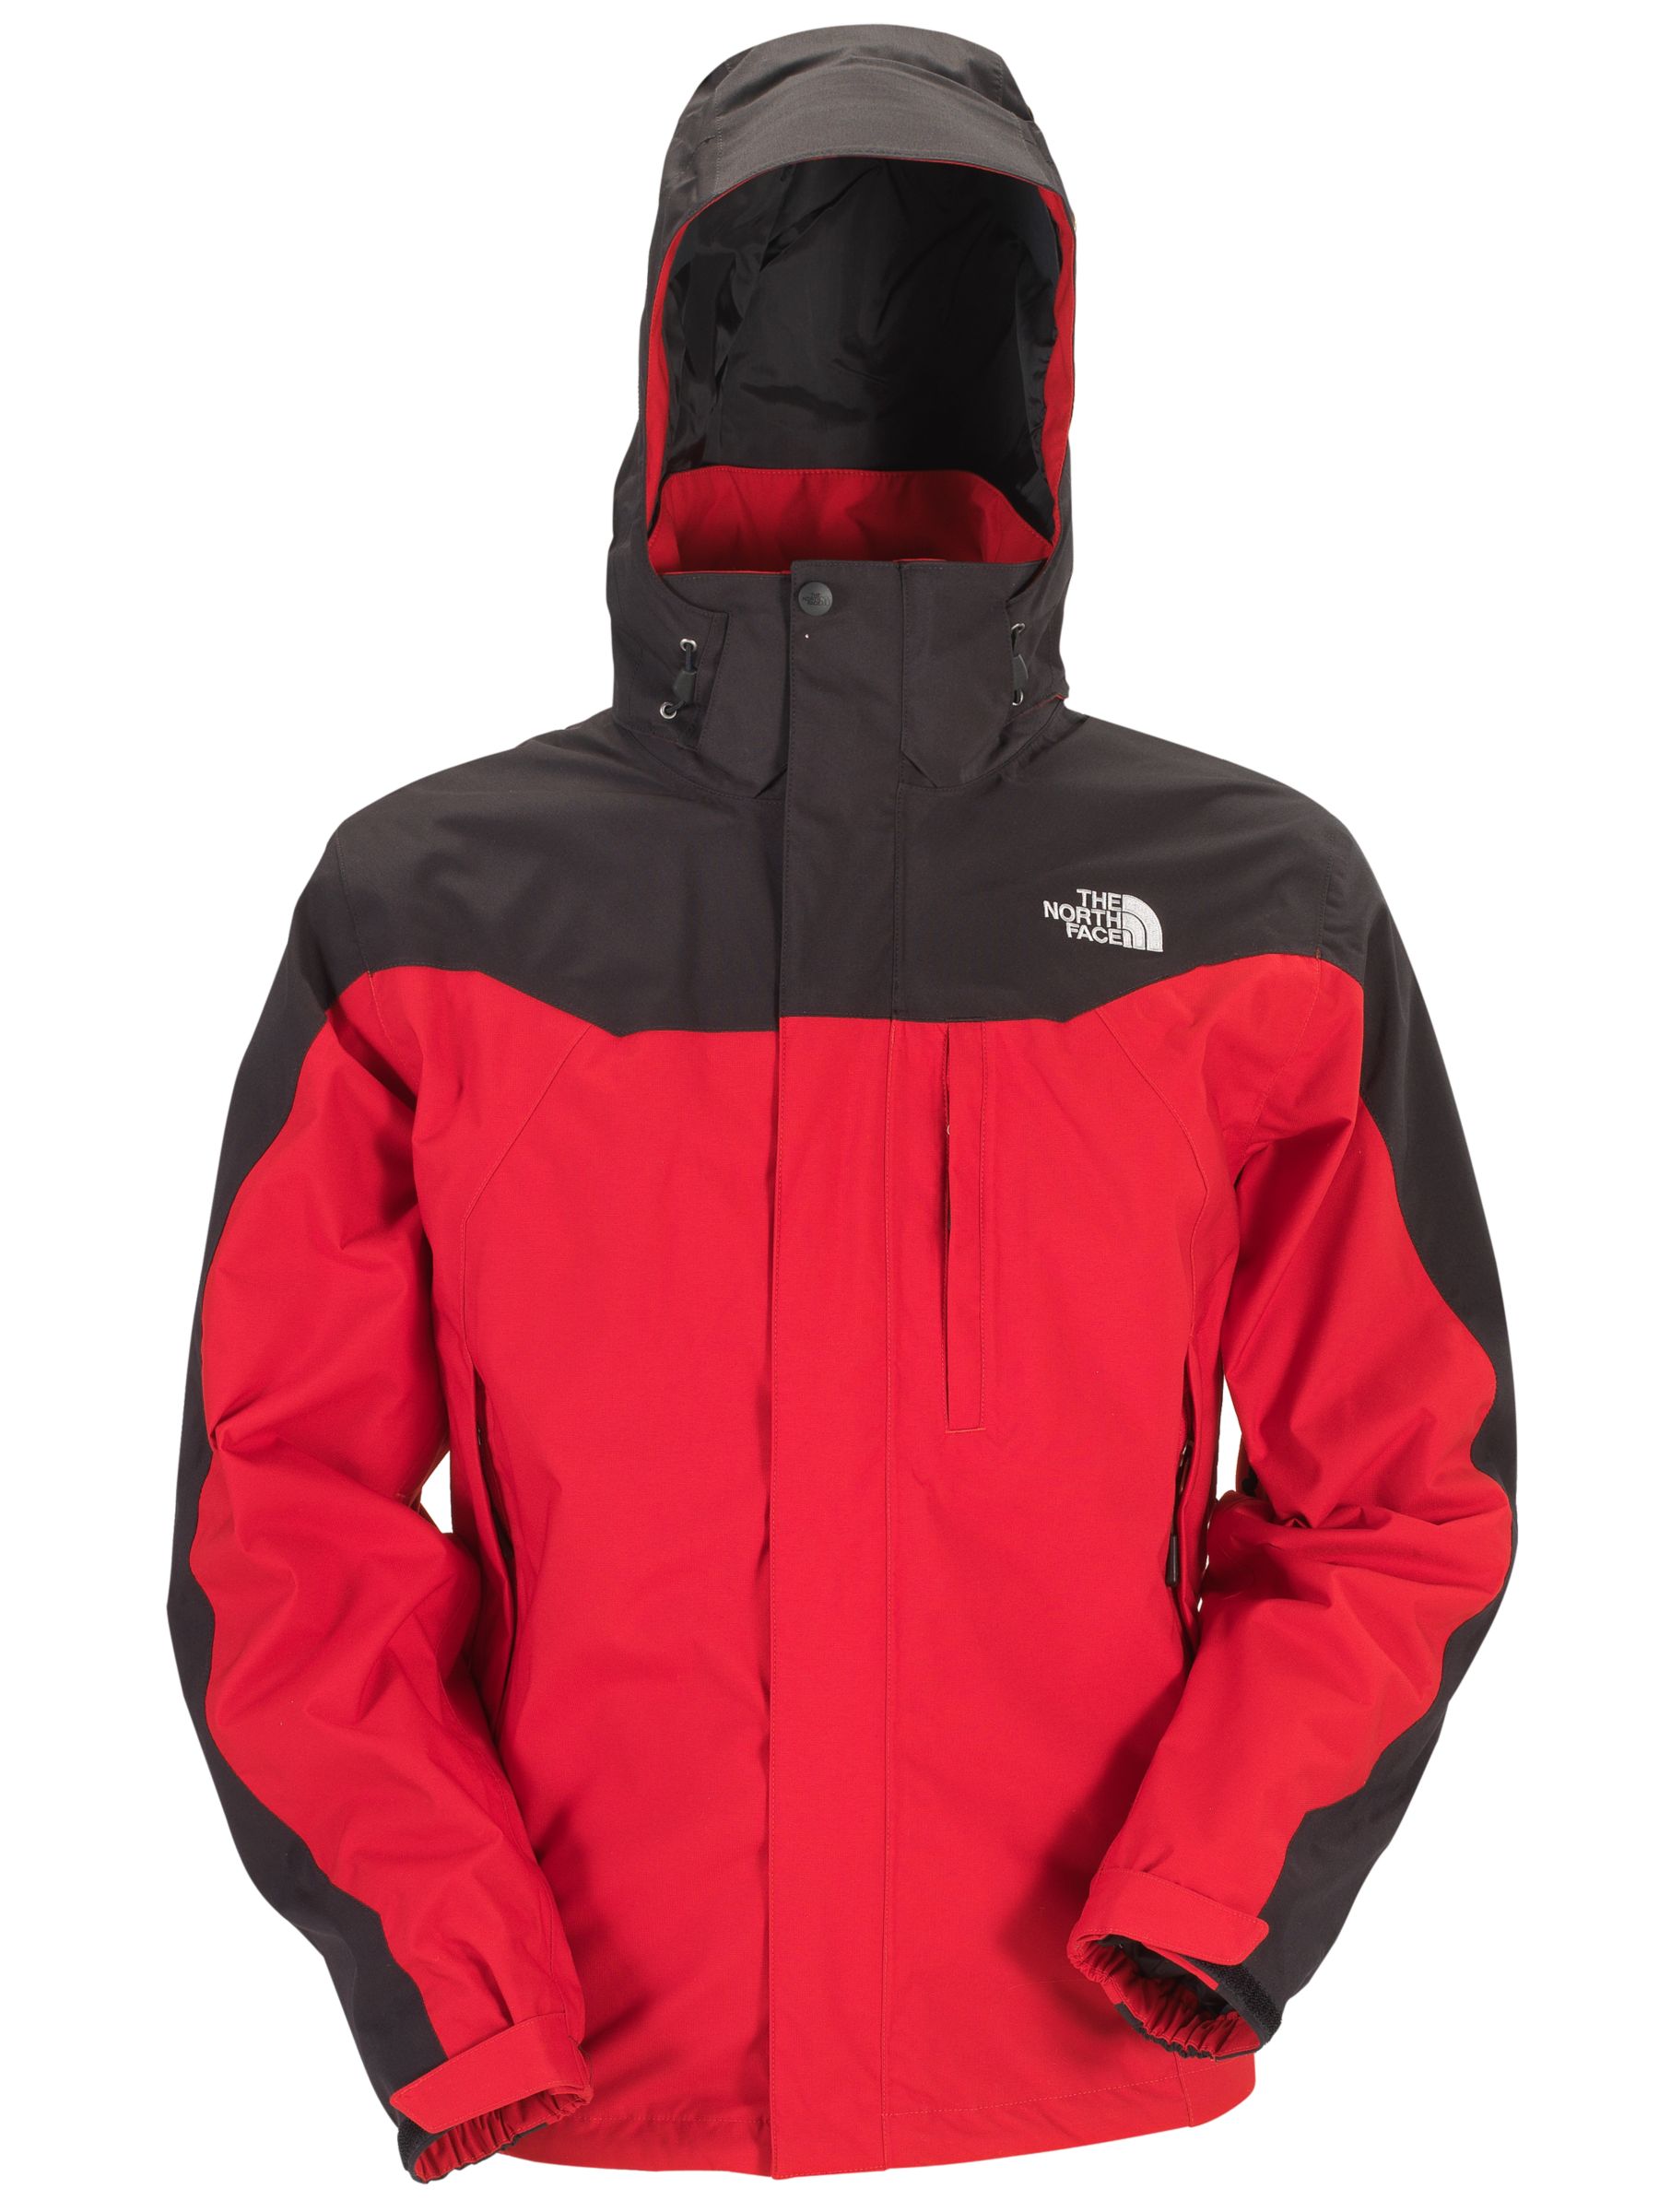 The North Face Varius Guide Jacket, Red/Black at John Lewis